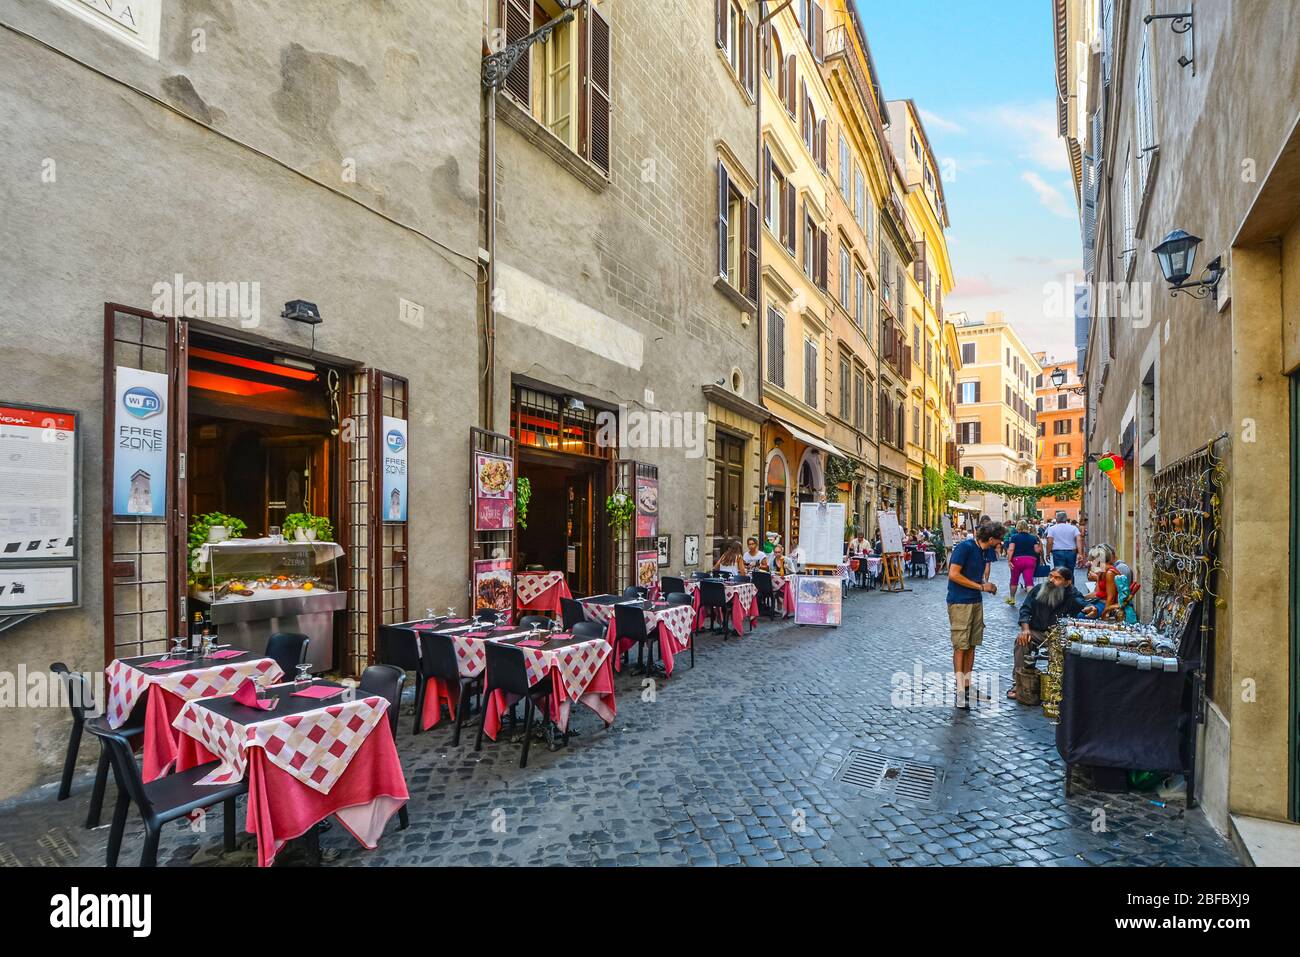 Colorful Italian restaurant with tables set at a sidewalk cafe in an alley in Rome Italy with a street vendor selling souvenirs to a customer. Stock Photo